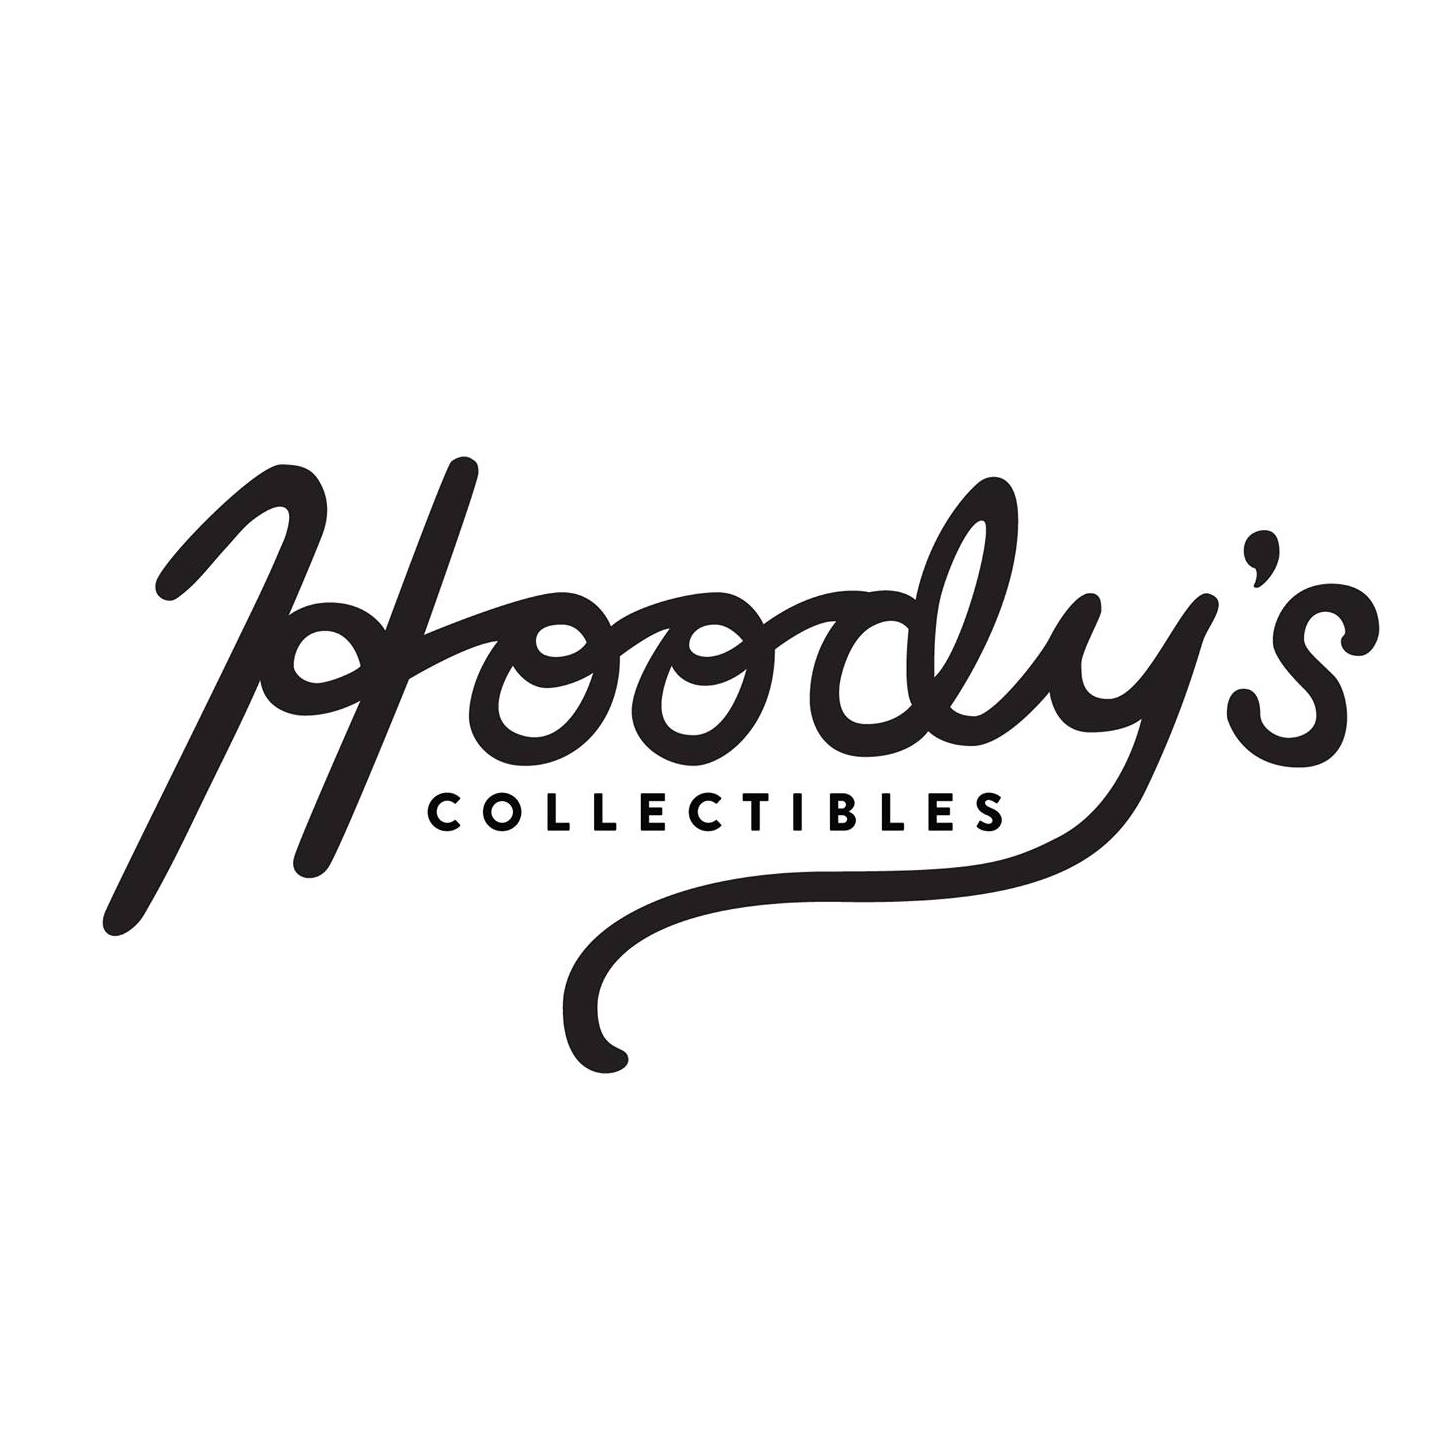 Hoody's Collectibles LLC